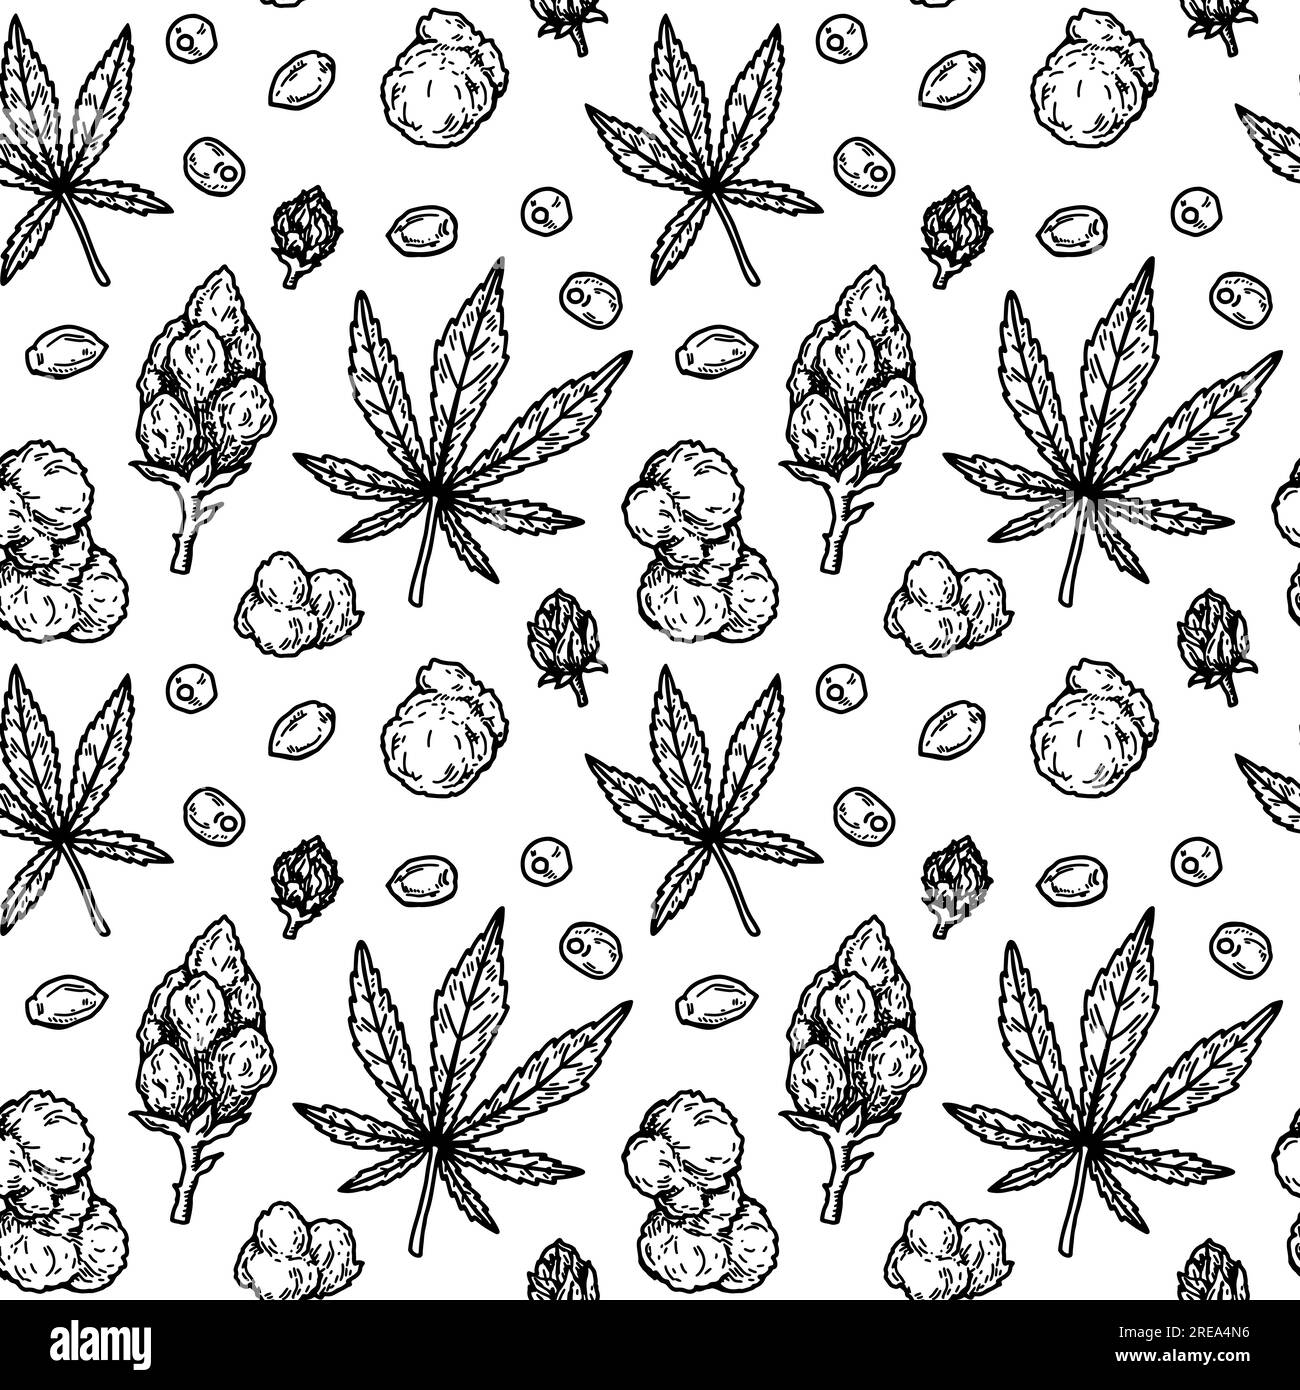 Marijuana leaves and buds seamless pattern. Cannabis hand drawn vintage background. Vector illustration in sketch style. Weed engraving design Stock Vector